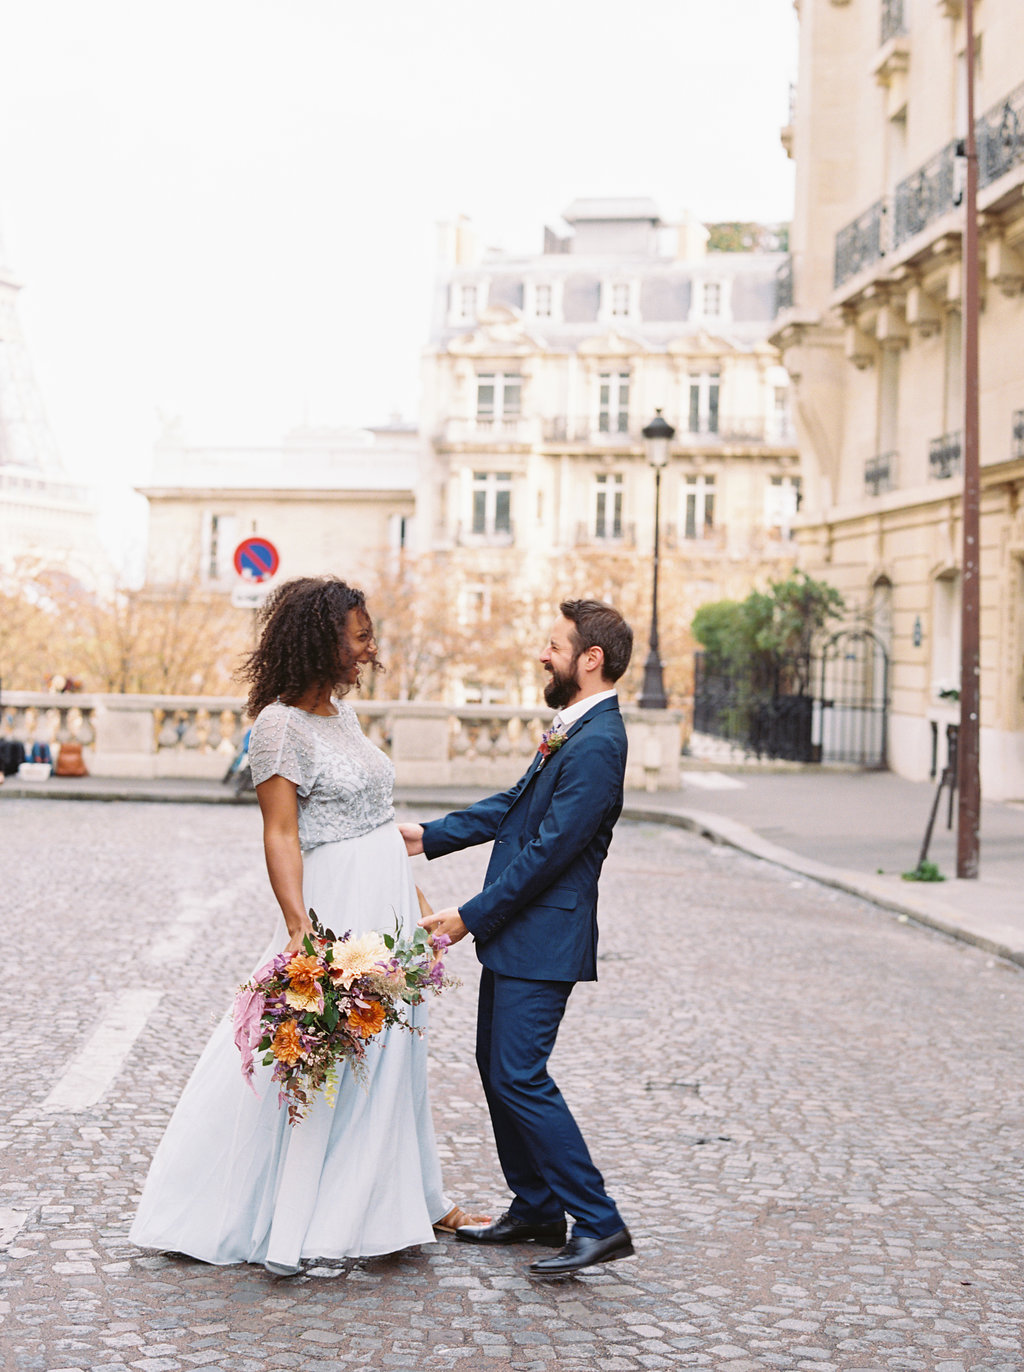 Paris Elopement in front of the Eiffel Tower // Lush, natural wedding flowers